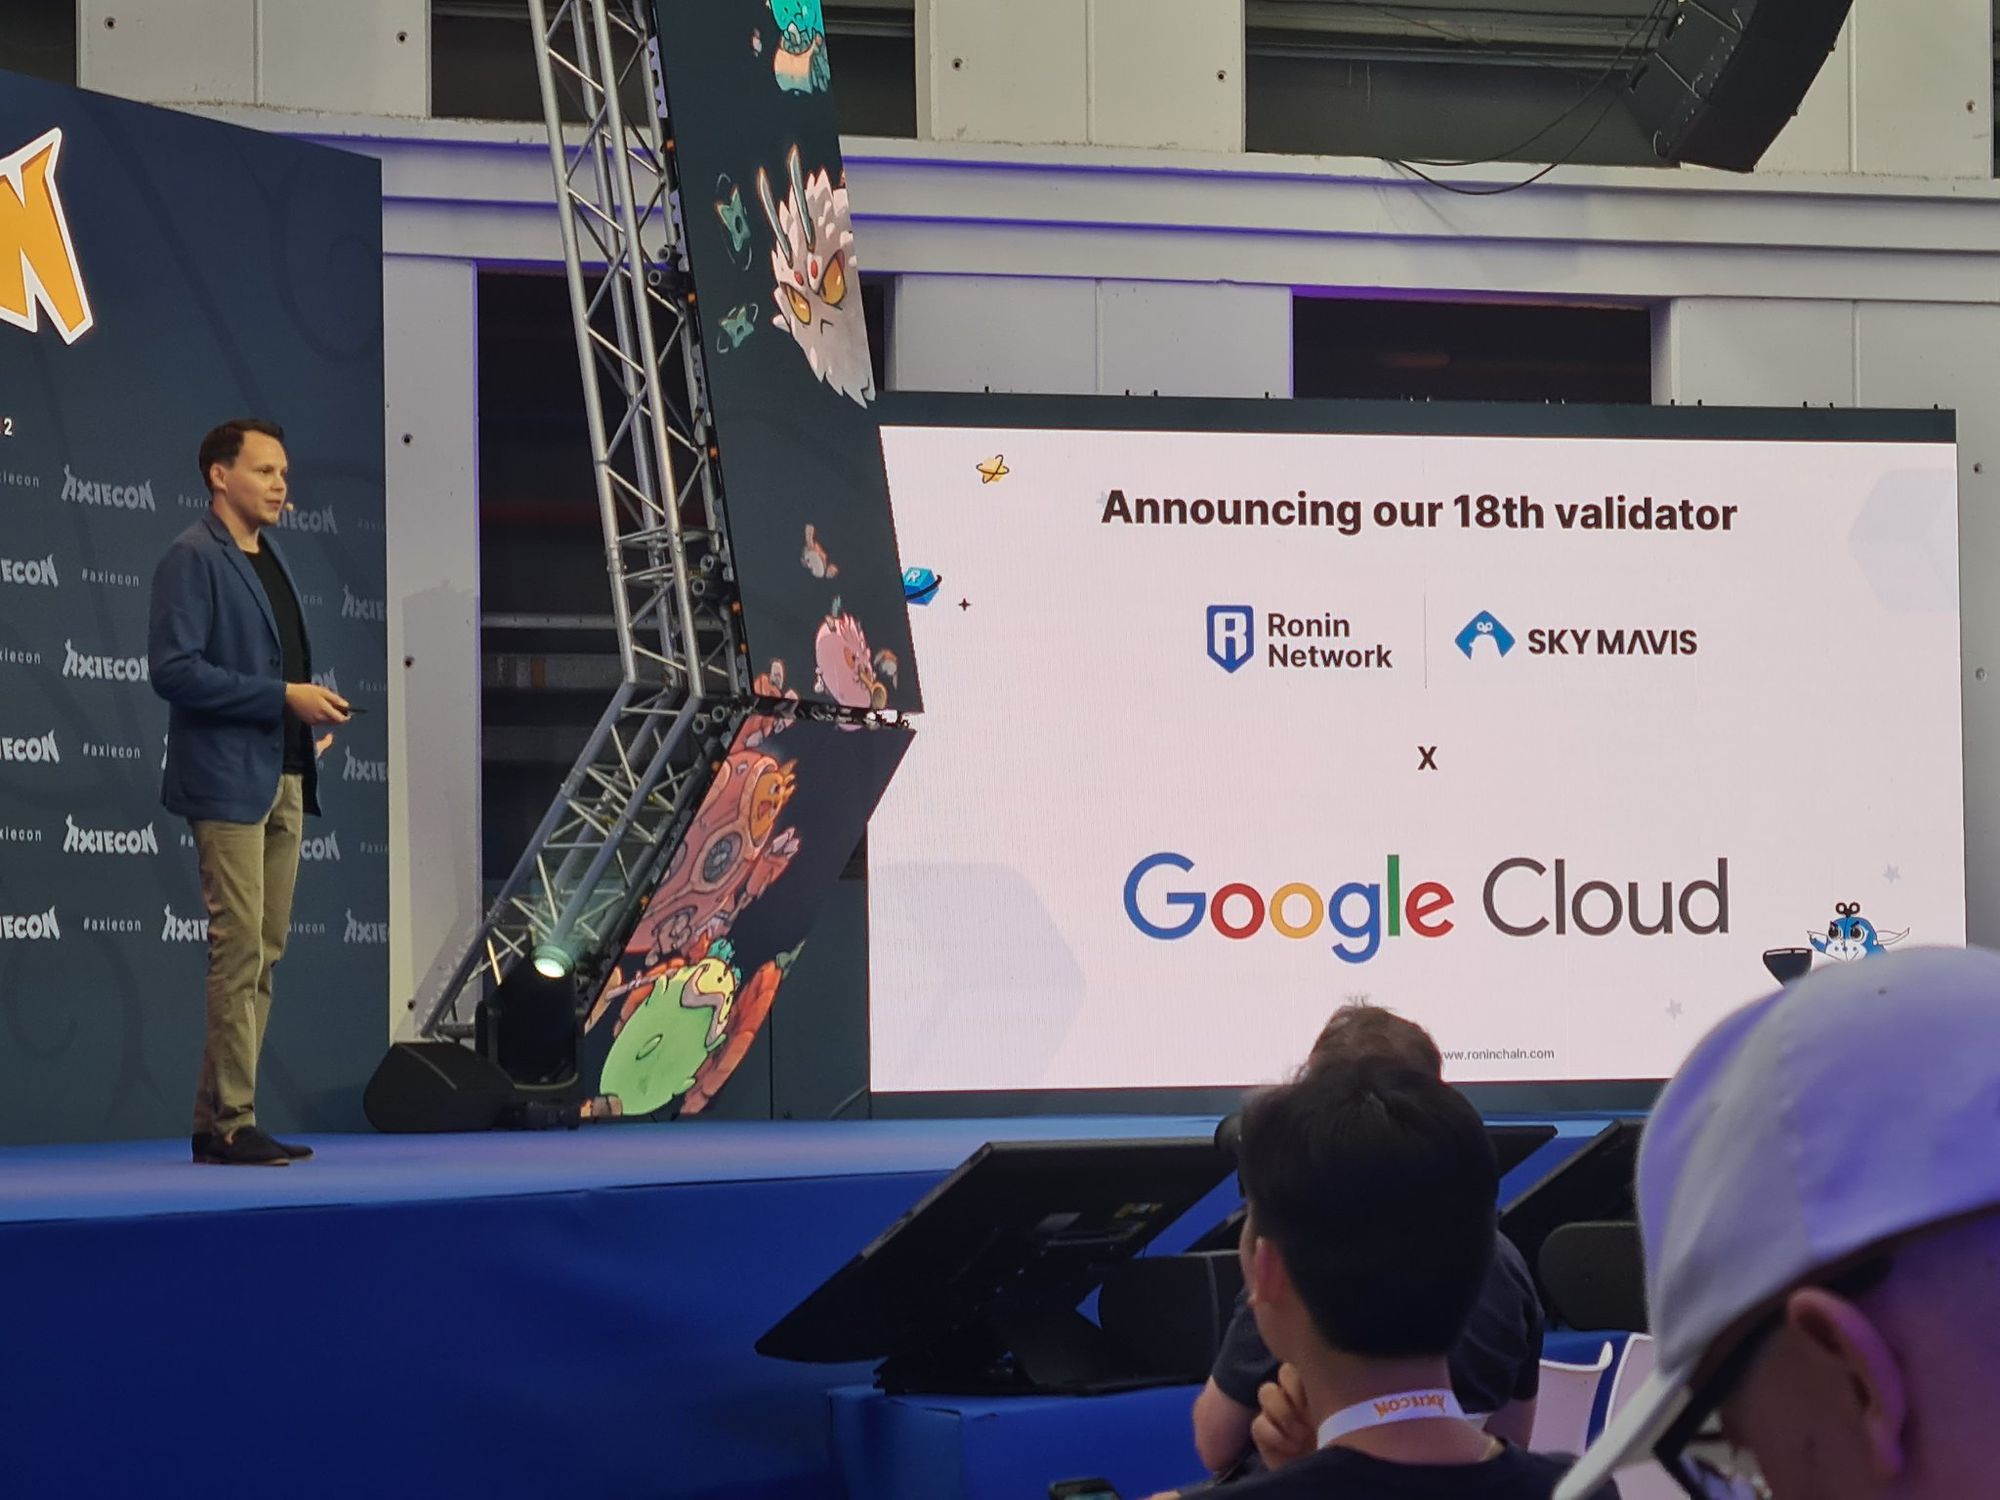 Sky Mavis Collaborates with Google Cloud  to Bolster the Security of Ronin network